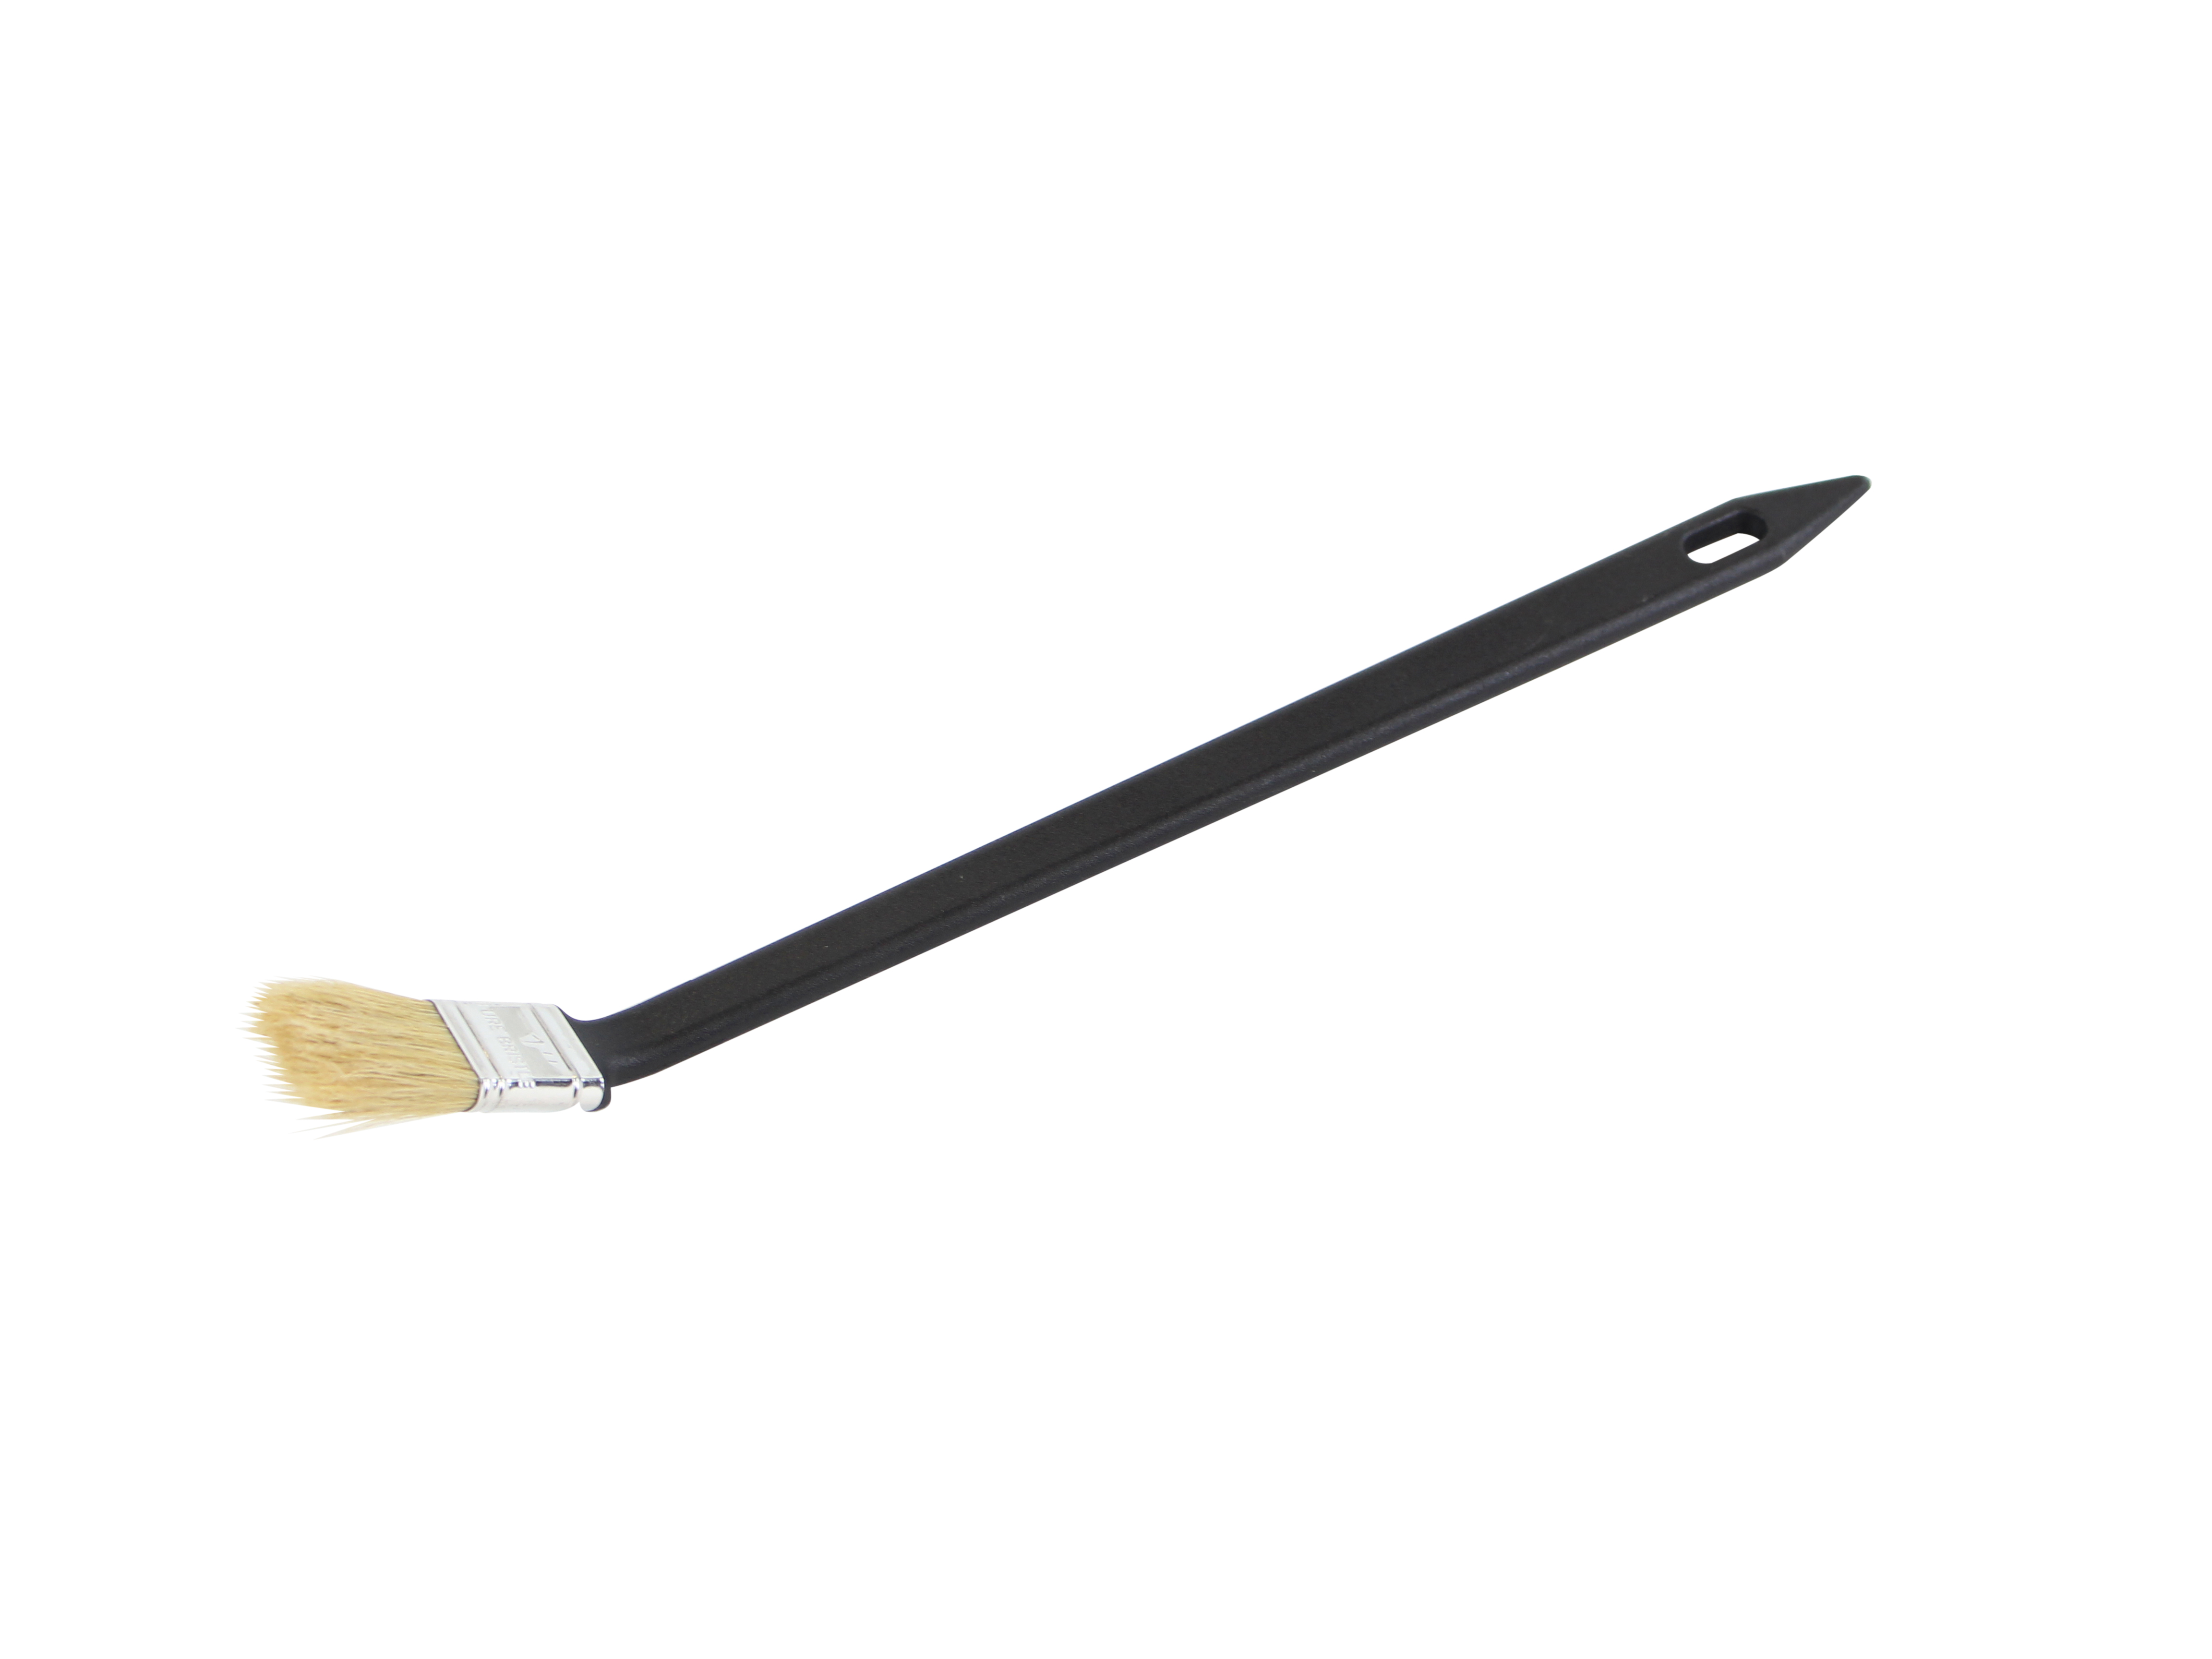 Radiator paint brush 1" - Suitable for epoxy and polyester